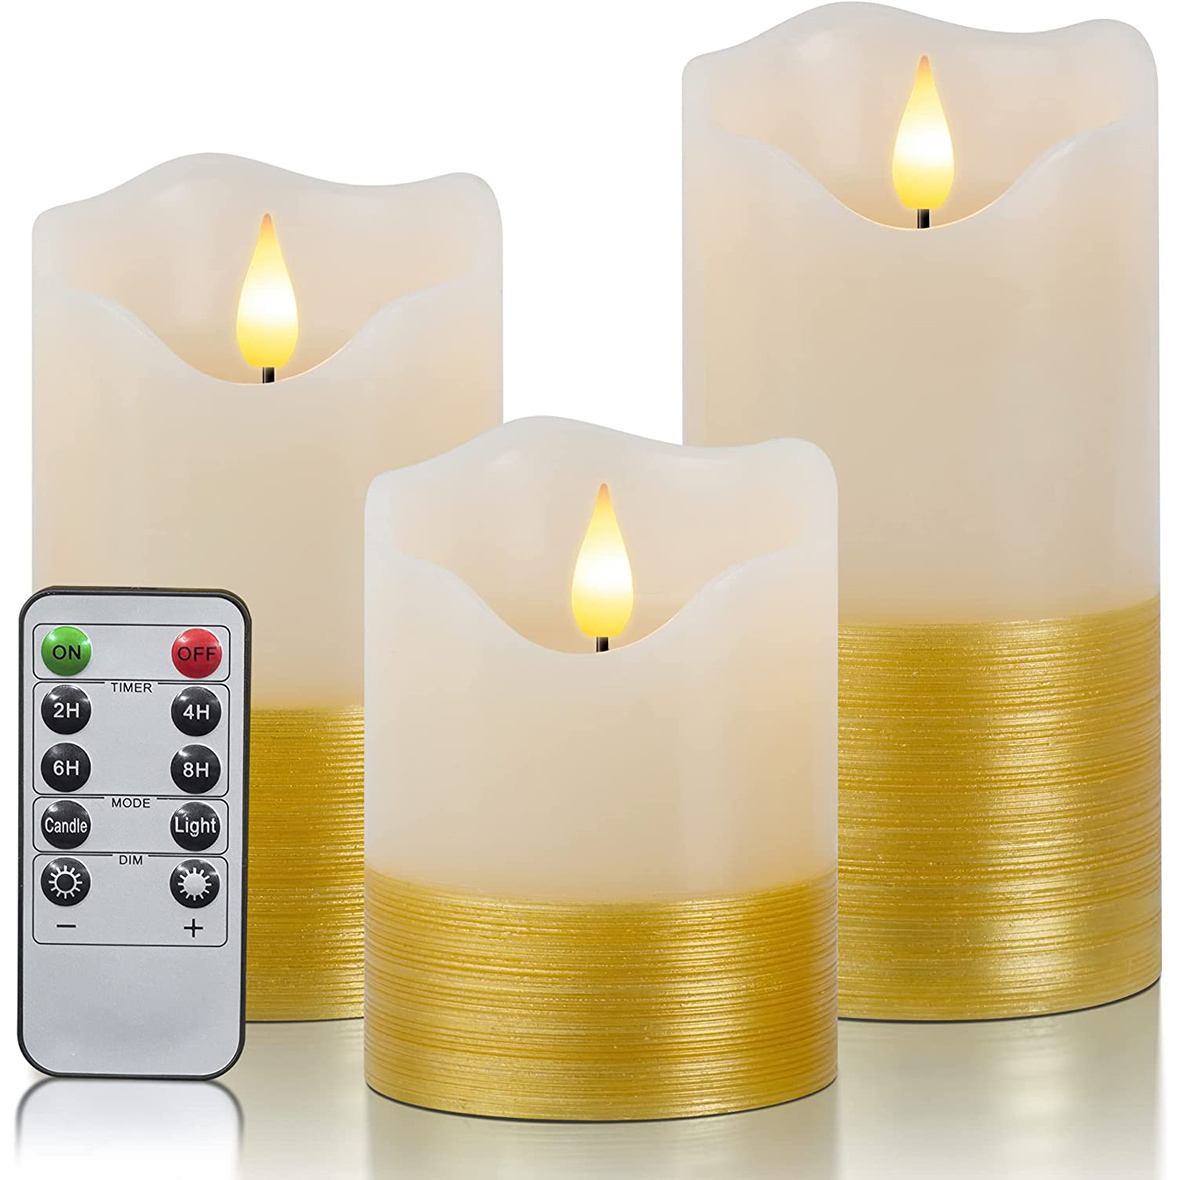 Yongmao Flameless Candles Gold Trim Battery Operated Pillar Real Wax LED Electric Candles Warm Light 3D Wick Flickering with 10-Key Remote for Home Wedding Birthday Decoration D3" H4" 5" 6"(Set of 3)